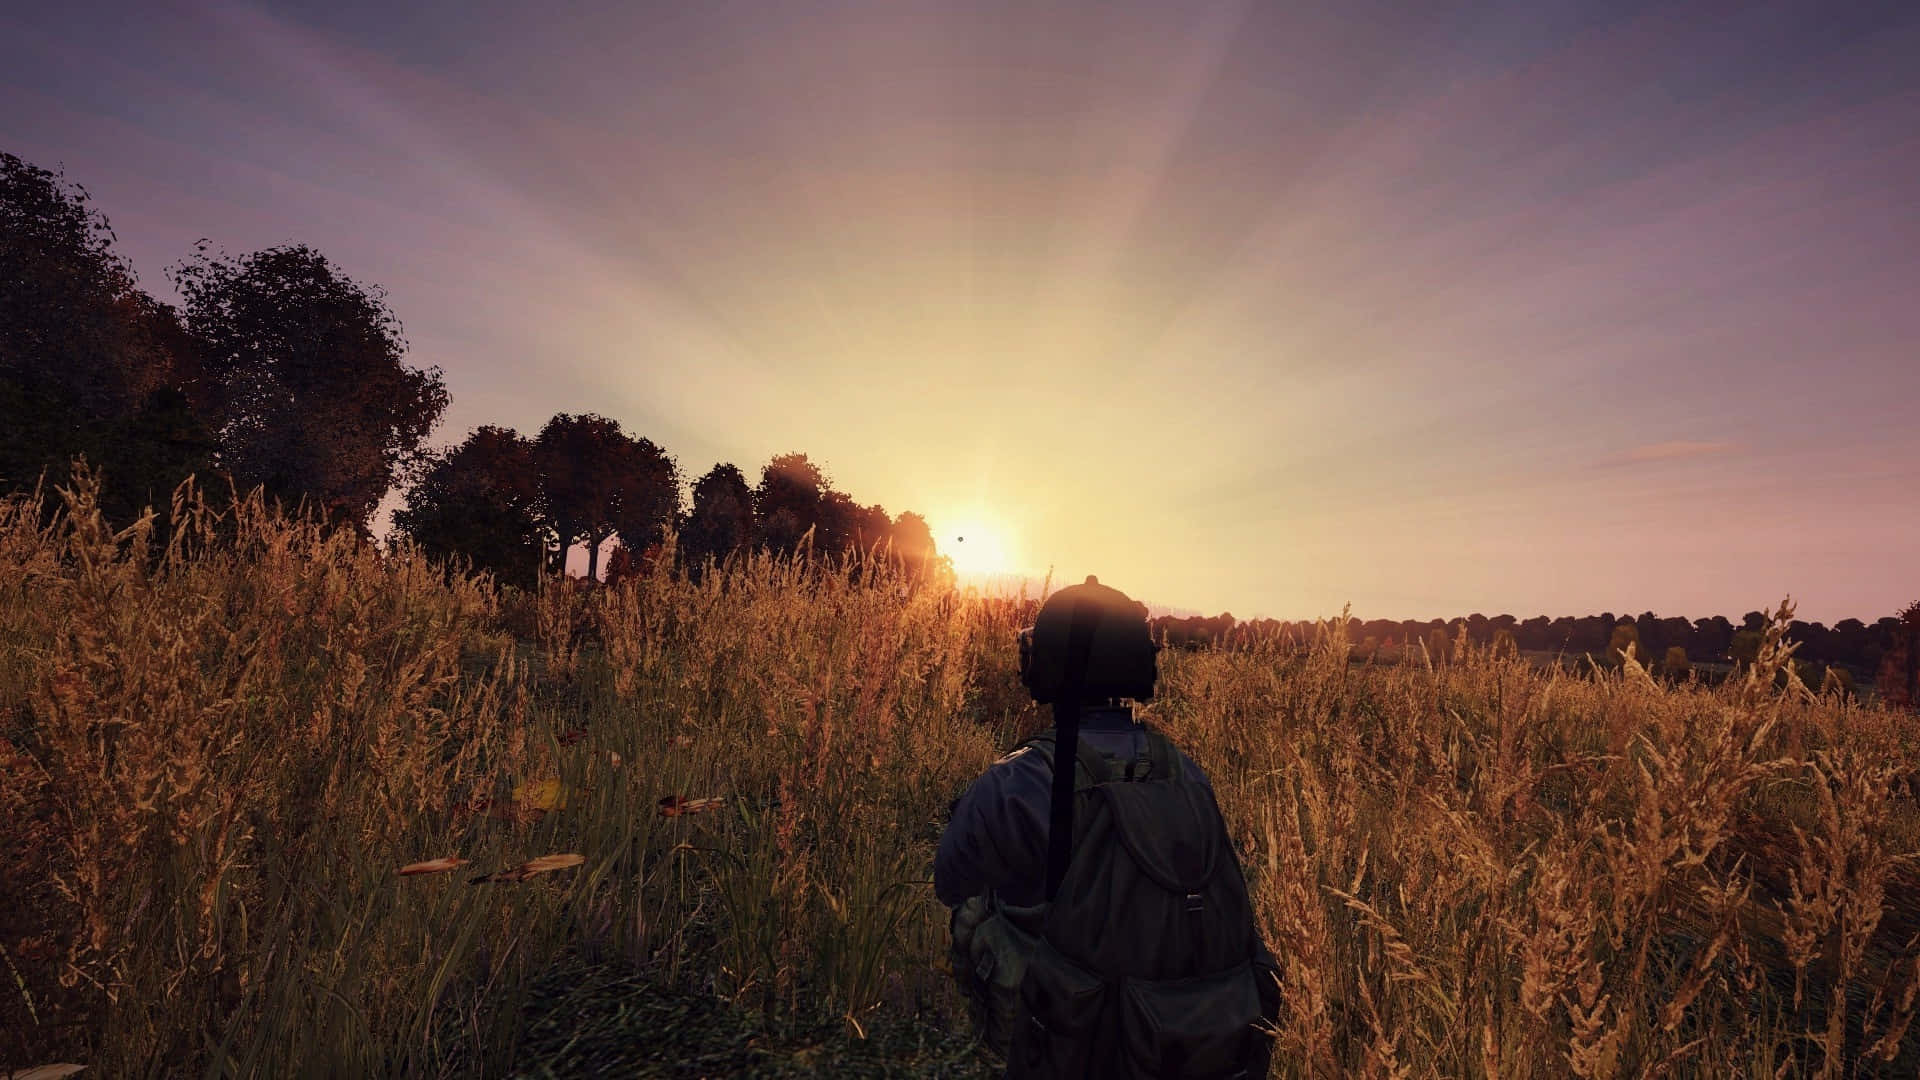 1080p Dayz Background Person In A Wheat Field